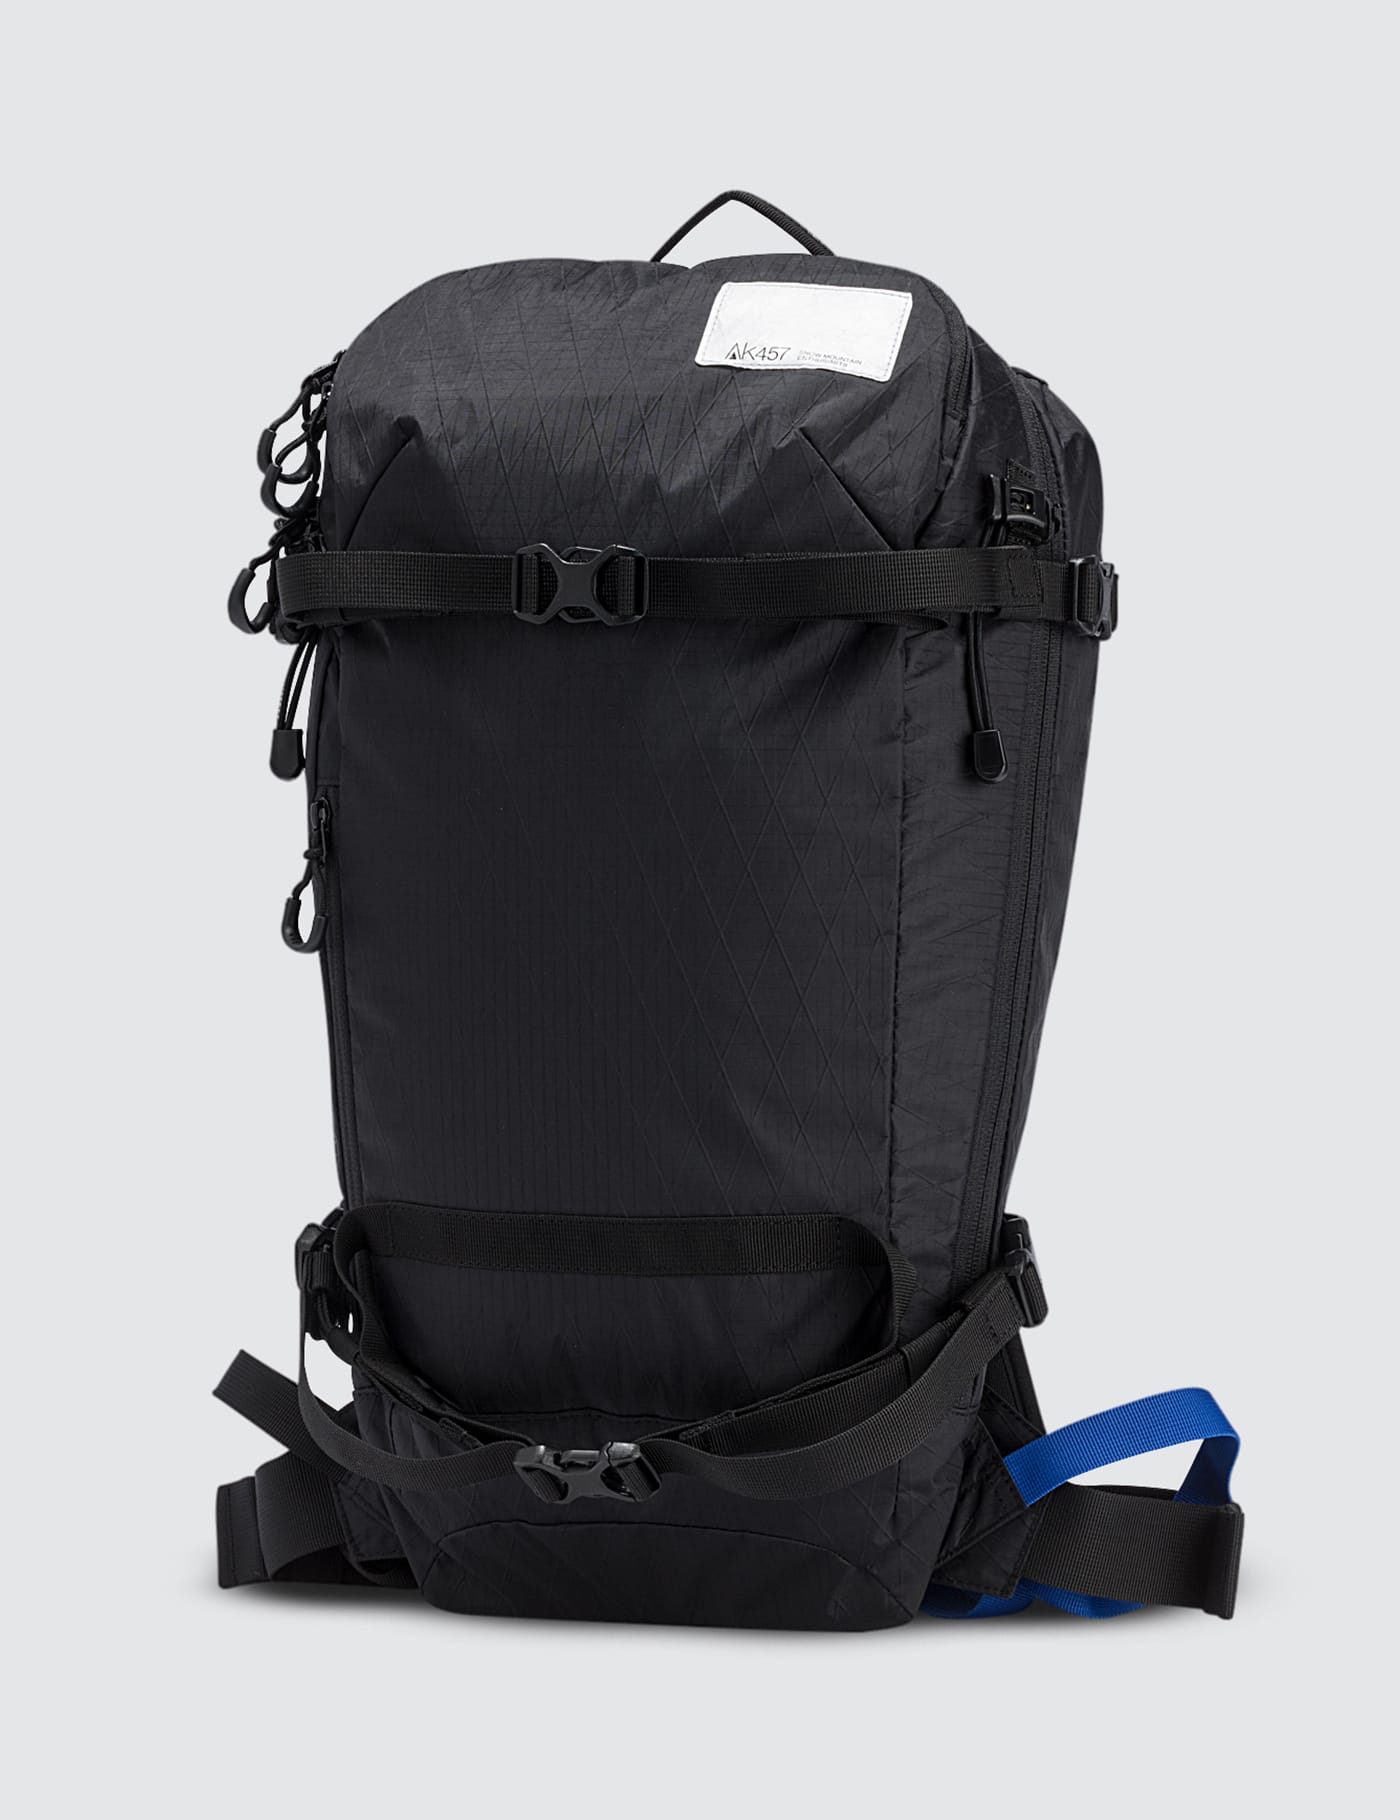 BURTON AK457 - Jet Pack | HBX - Globally Curated Fashion and